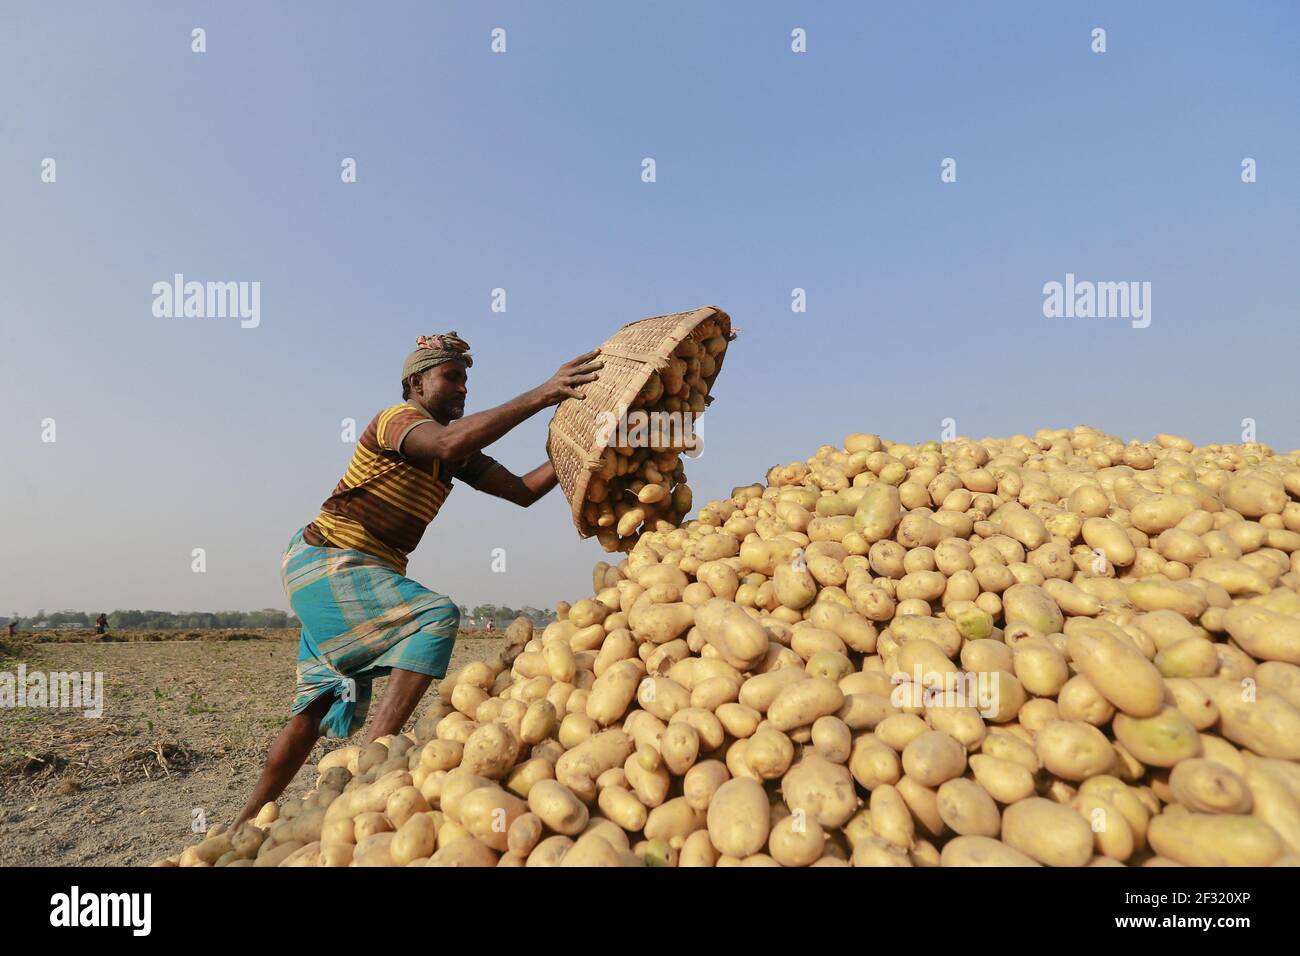 A Bangladeshi farmer unload potatoes after collect them from a field in Munshigonj, near Dhaka, Bangladesh, March 14, 2021. As the winter season draws to an end, the farmers get busy harvesting potatoes from the fields. Following a bumper production of potatoes this year, the farmers are now waiting to get a fair price for their harvests. Photo by Suvra Kanti Das/ABACAPRESS.COM Stock Photo